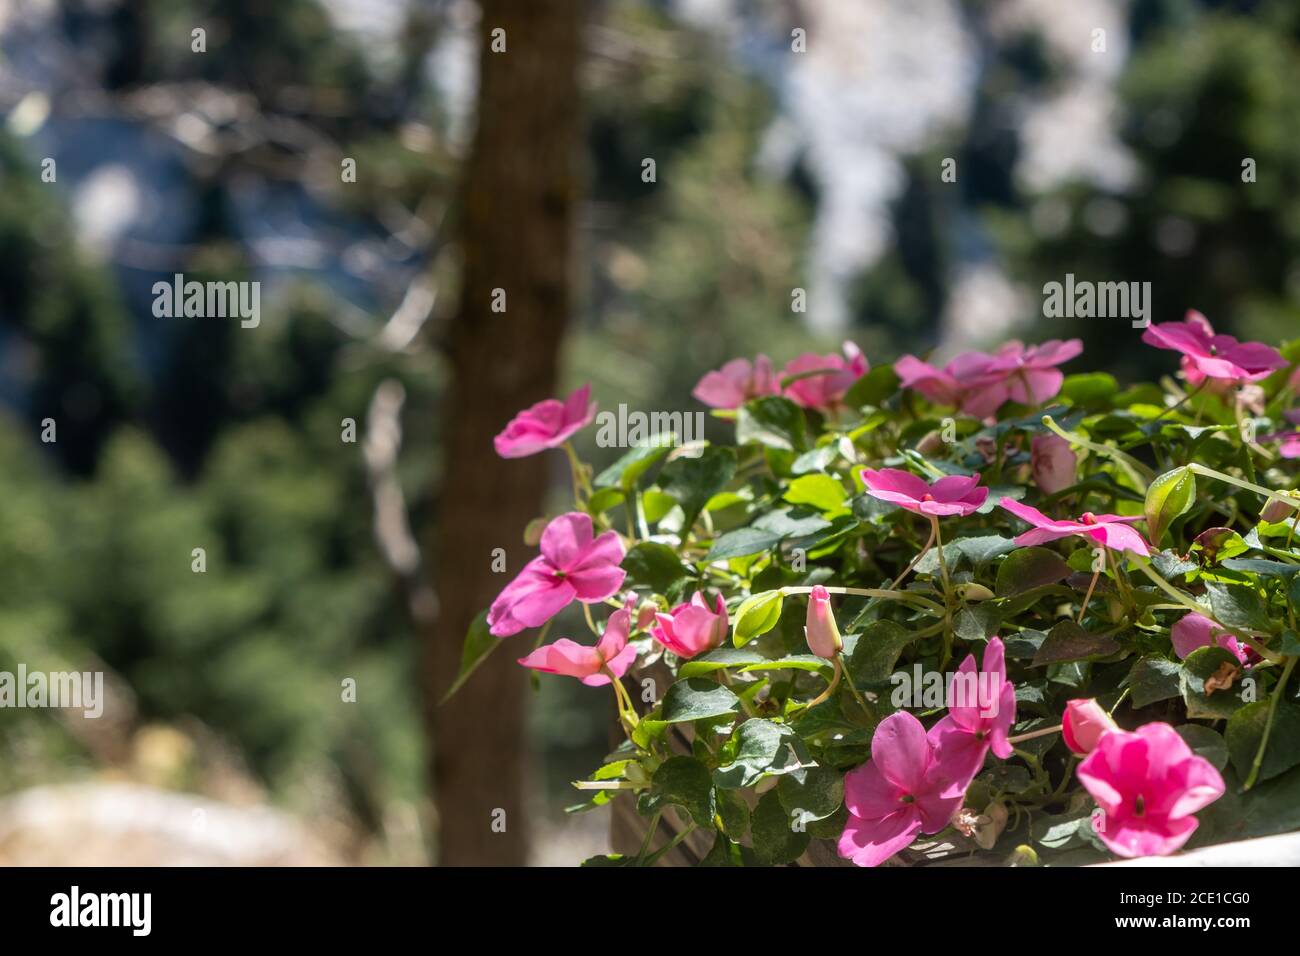 Pink flowers impatiens walleriana, busy Lizzie, balsam, sultana, blooming. Green perennial bush with lanceolate leaves. Blur nature background. Stock Photo